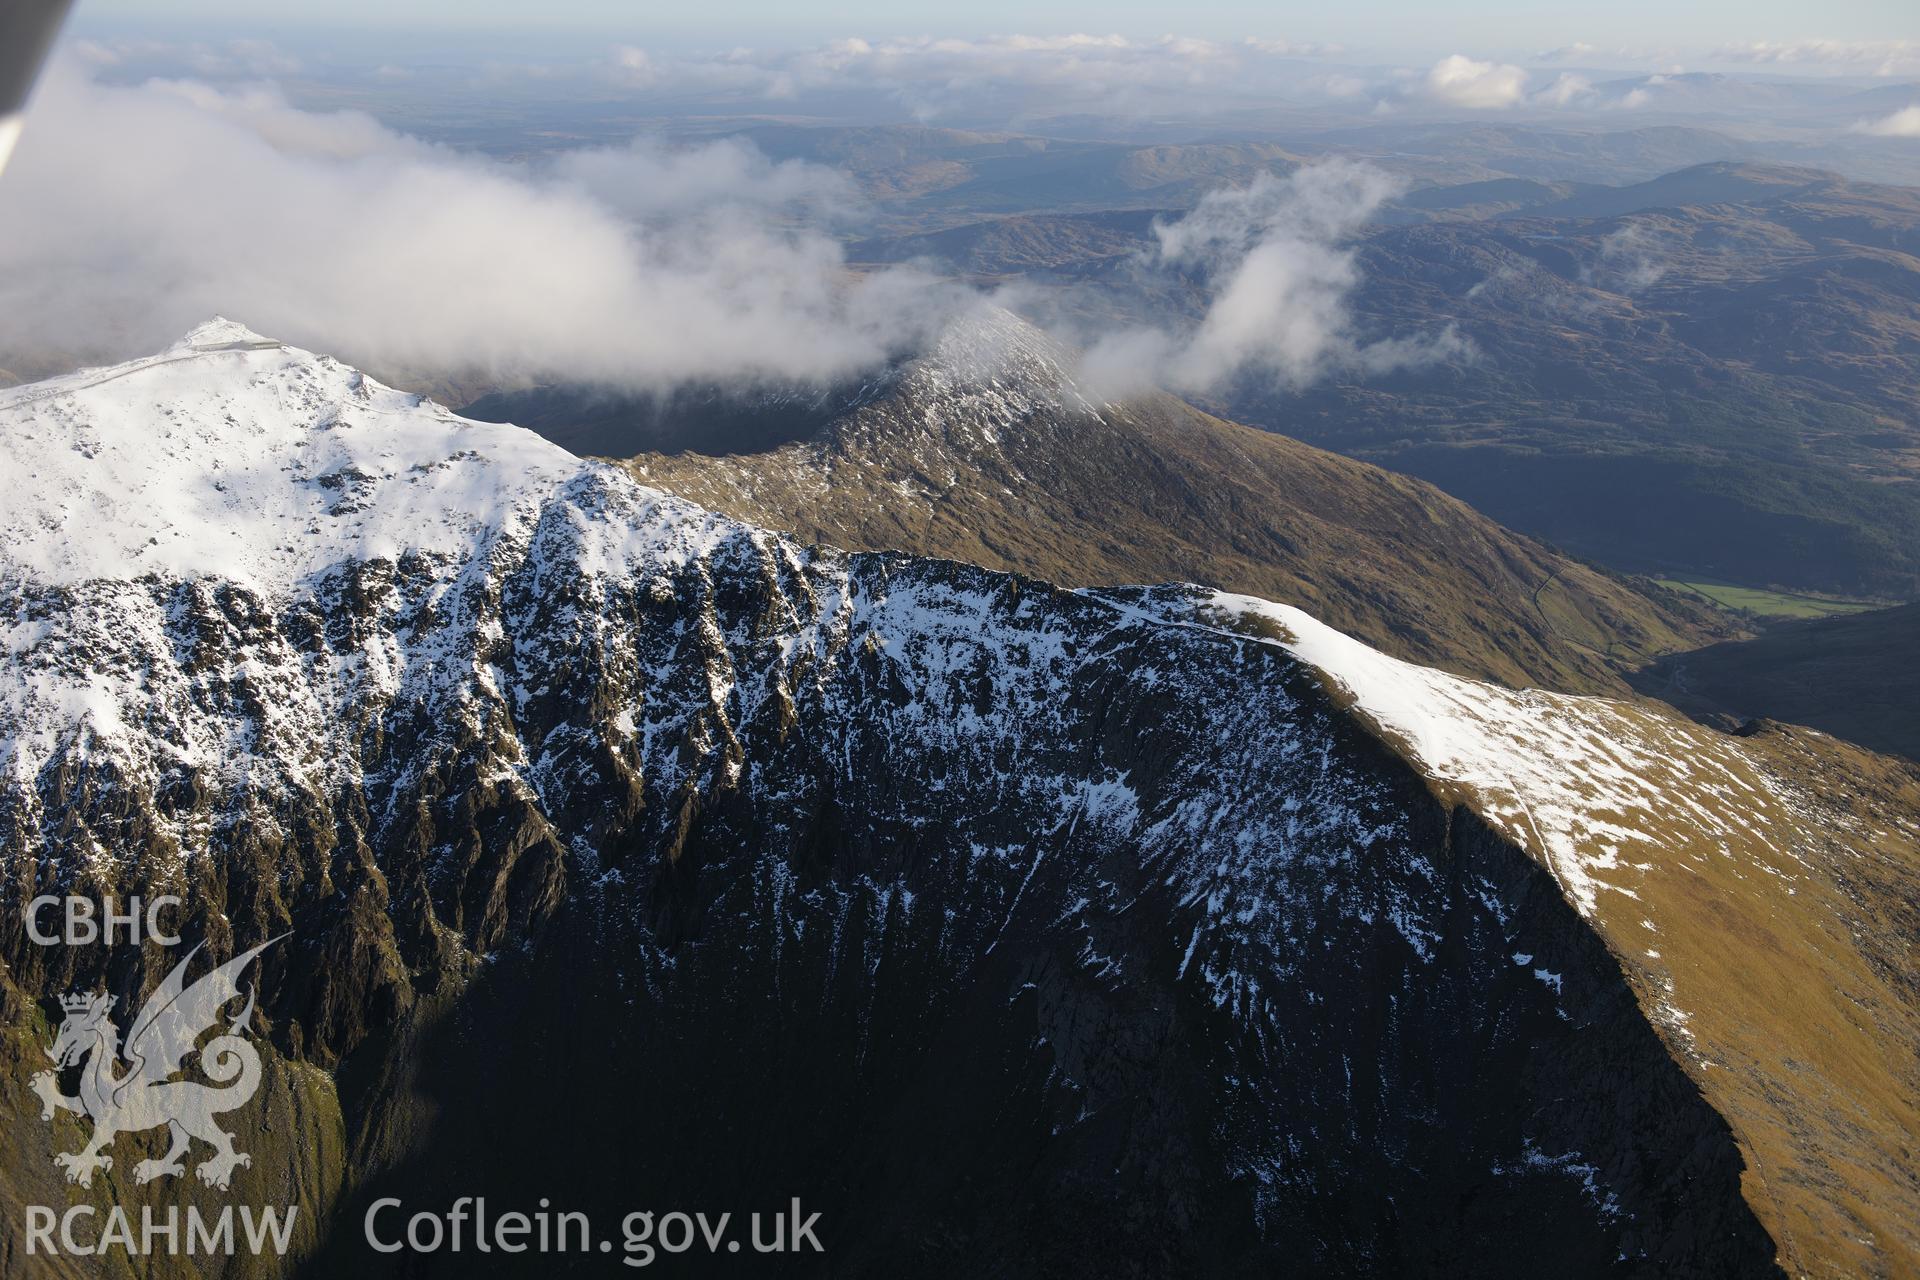 RCAHMW colour oblique photograph of Snowdon range, with Snowdon summit and Bwlch Main from the northwest, under snow. Taken by Toby Driver on 10/12/2012.